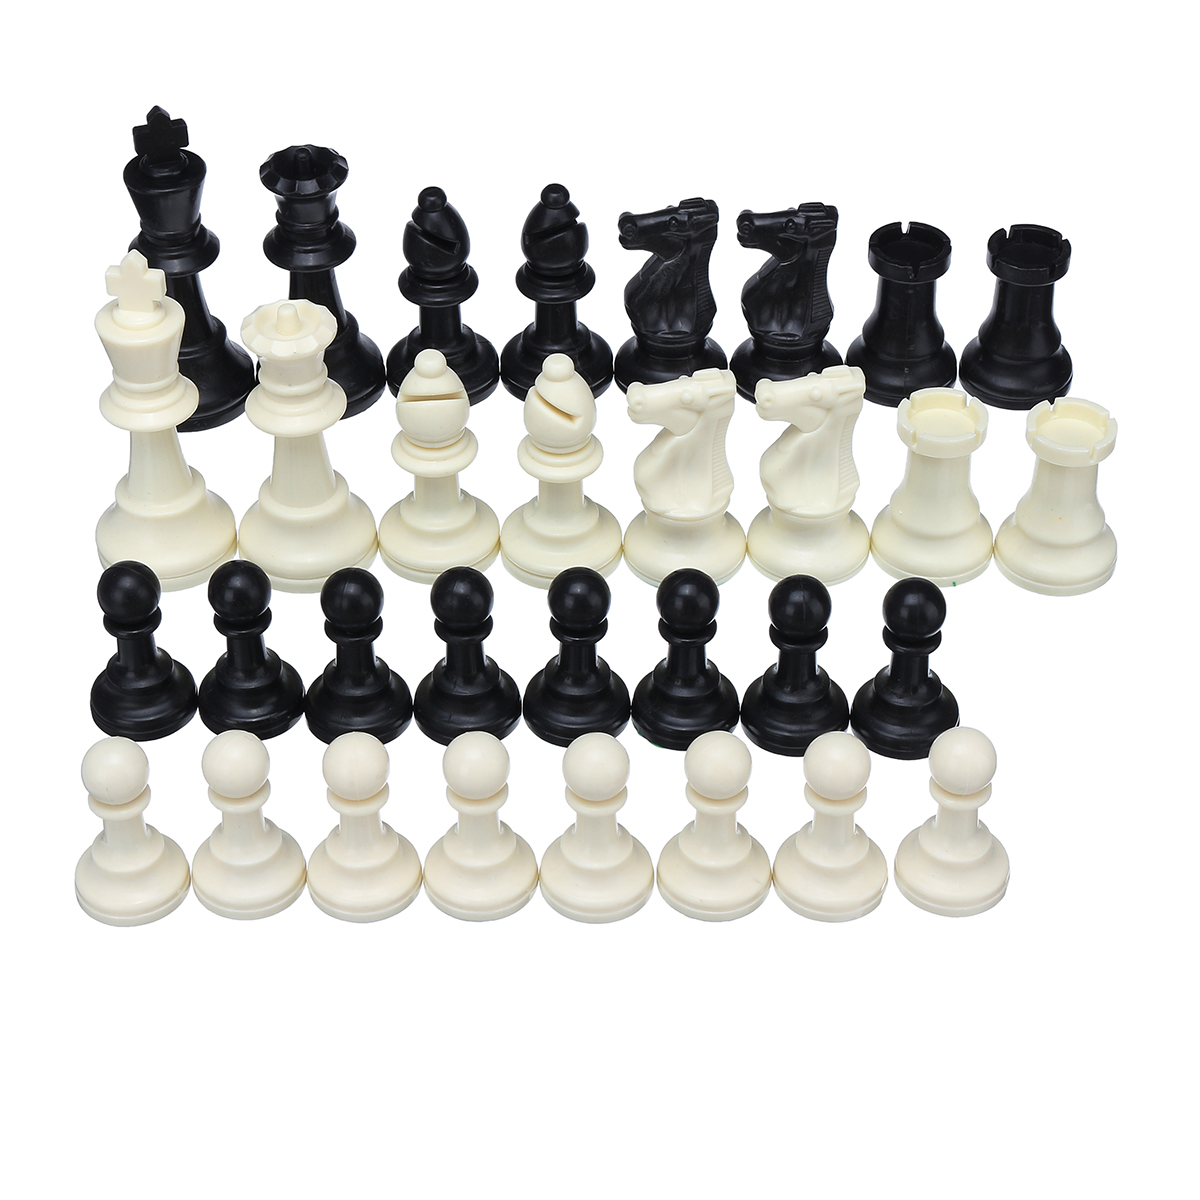 32-Piece-Game-Chess-Foldable-957564cm-King-Knight-Set-Outdoor-Recreation-Family-Camping-Game-1638530-3